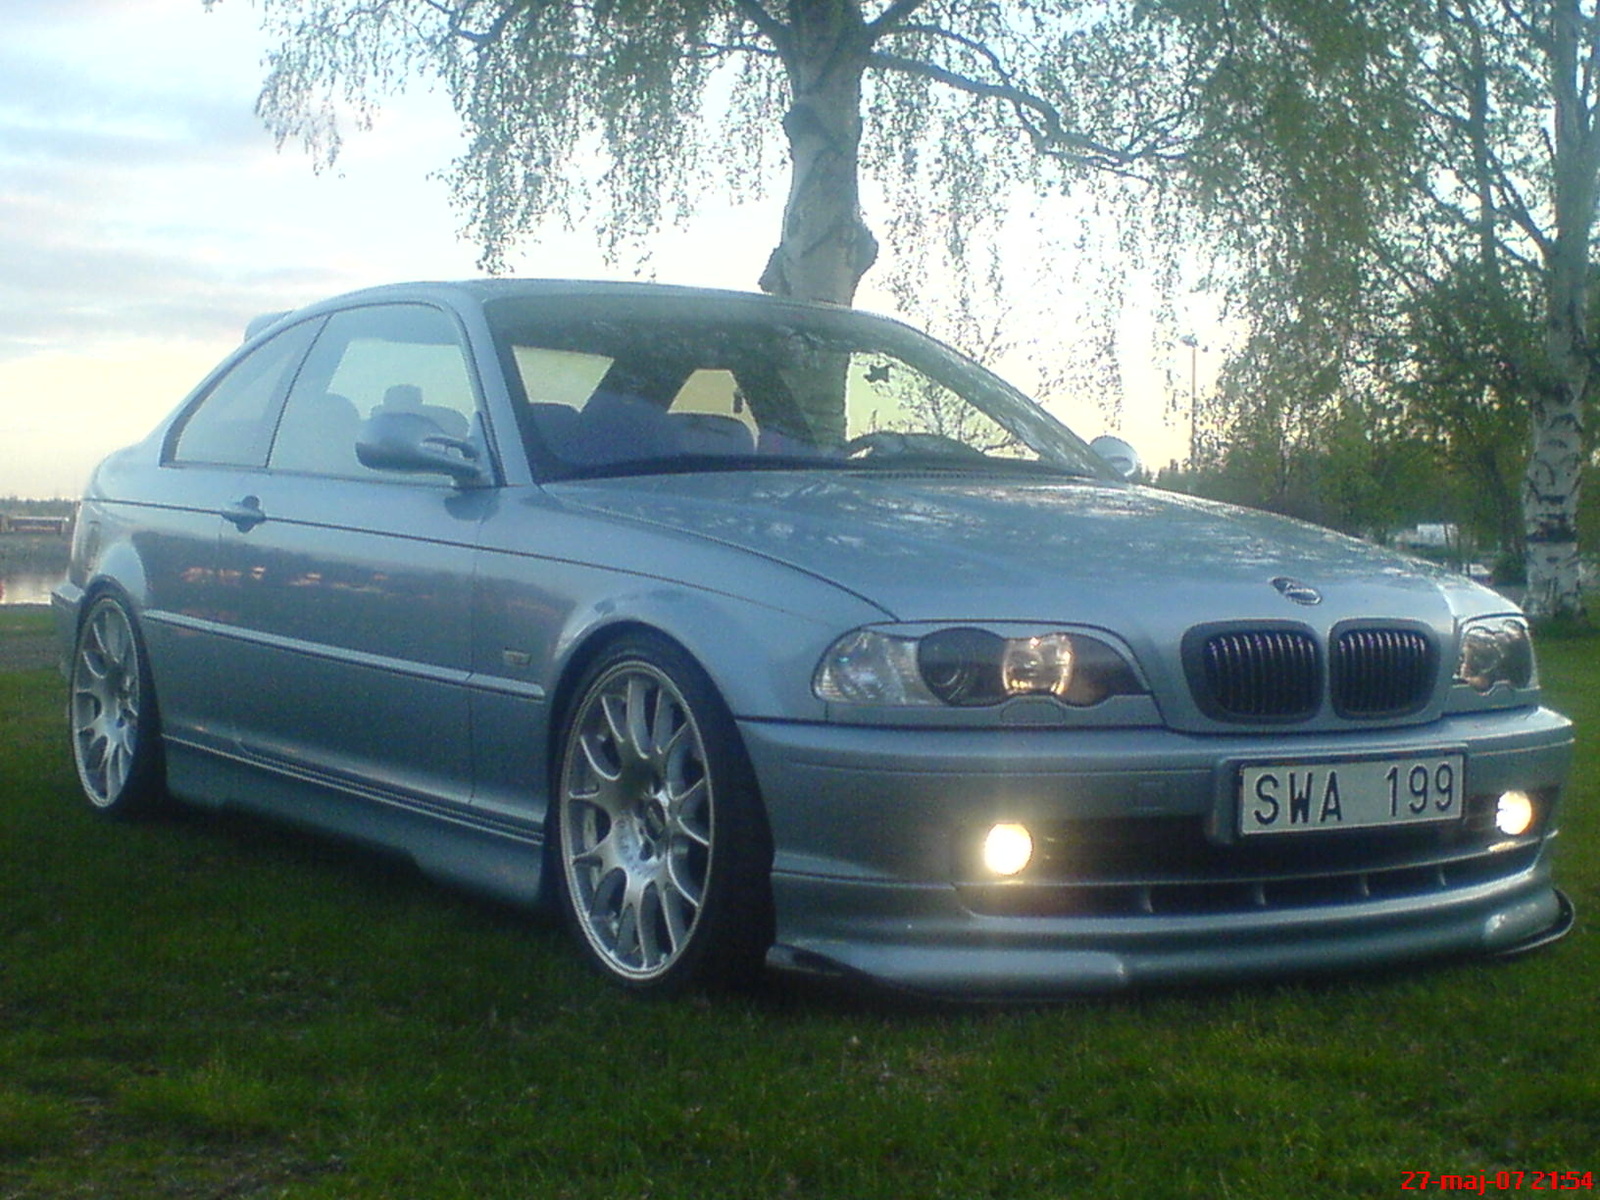 2000 Series on 2000 Bmw 3 Series   Pictures   2000 Bmw 328 Picture   Cargurus